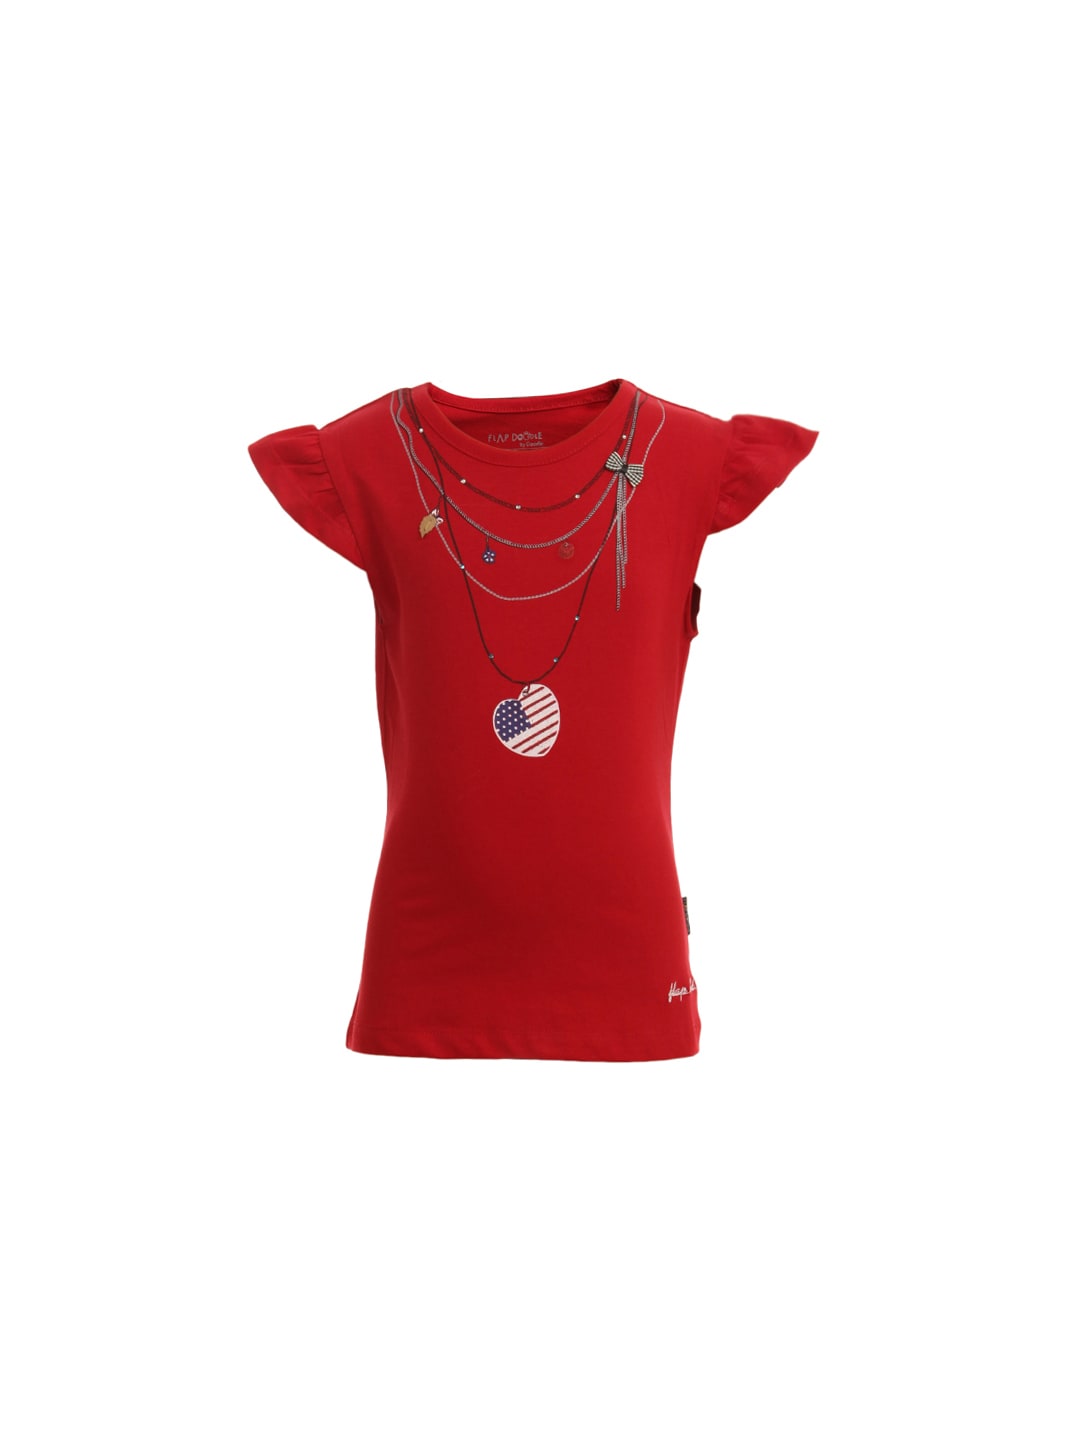 Doodle Girls Red Printed Top